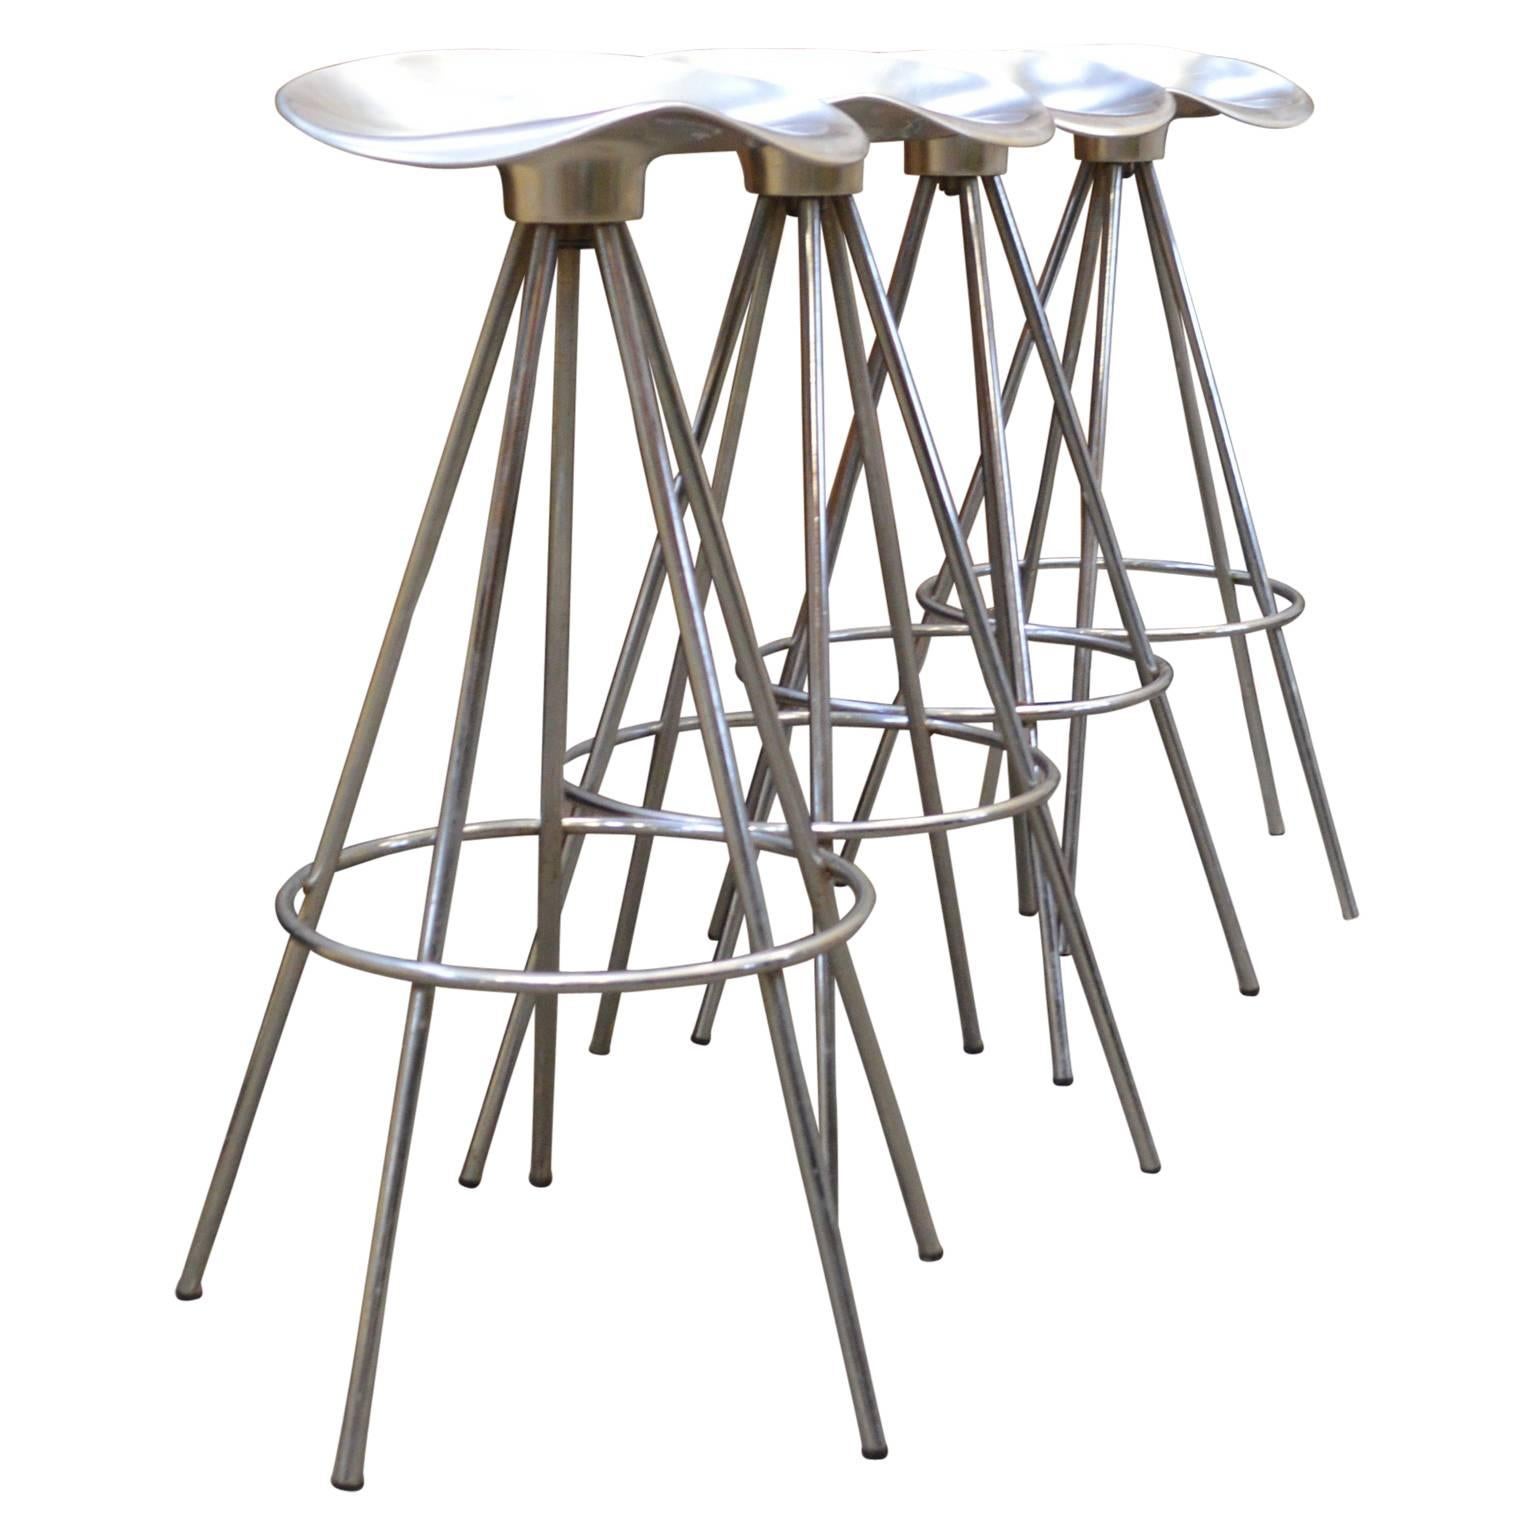 Set of four Jamaica stools by Pepe Cortes manufactured by Amat-3 for Knoll.
 